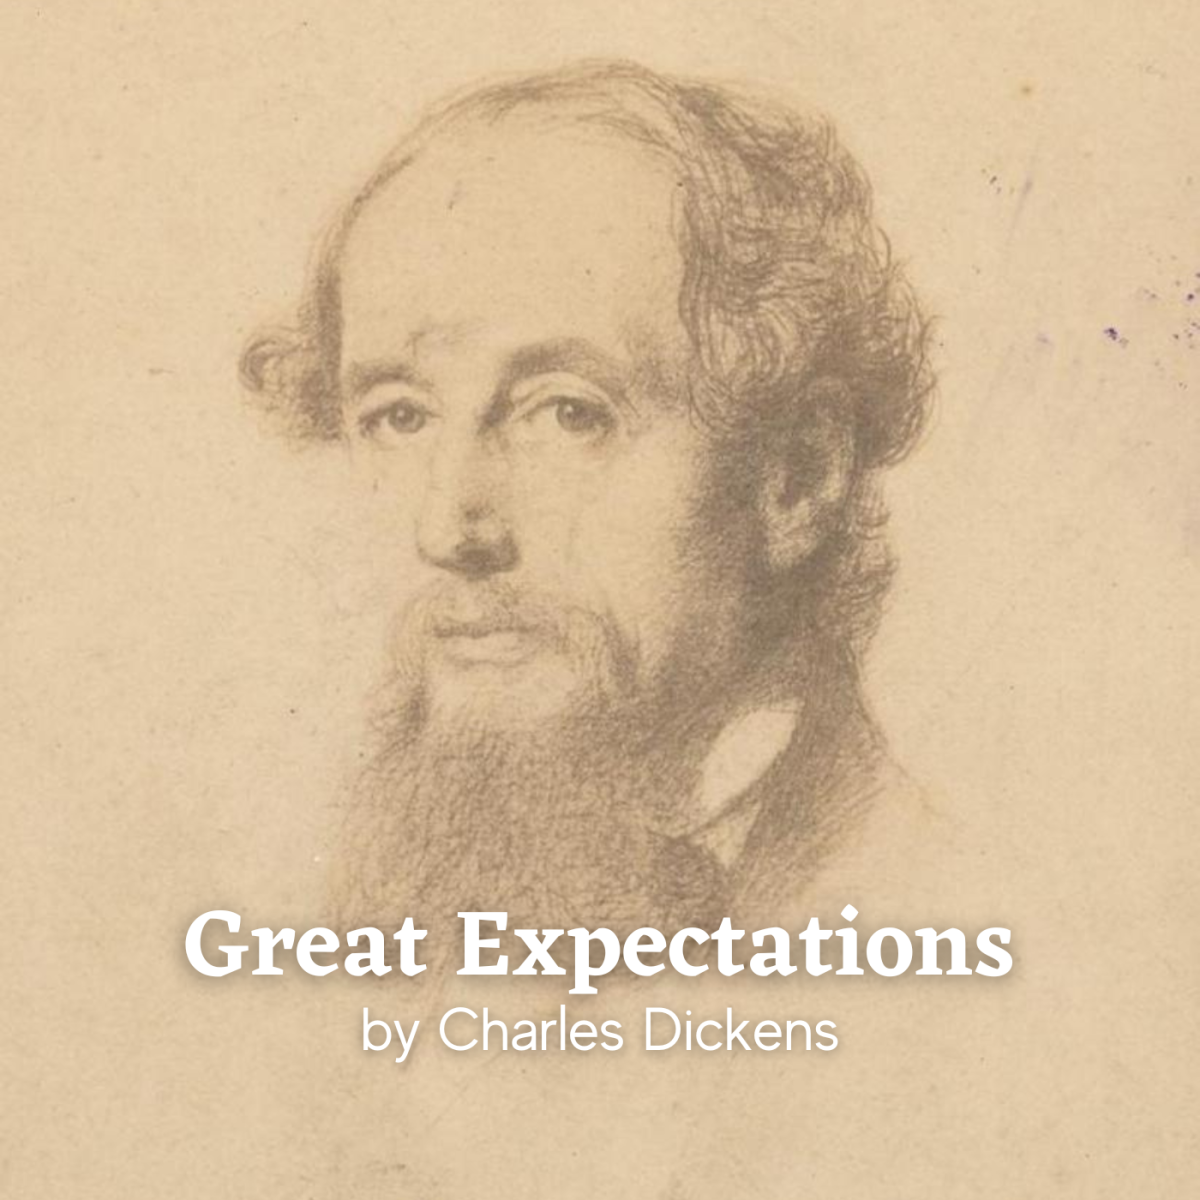 A review of the famous novel 'Great Expectations' by Charles Dickens.   